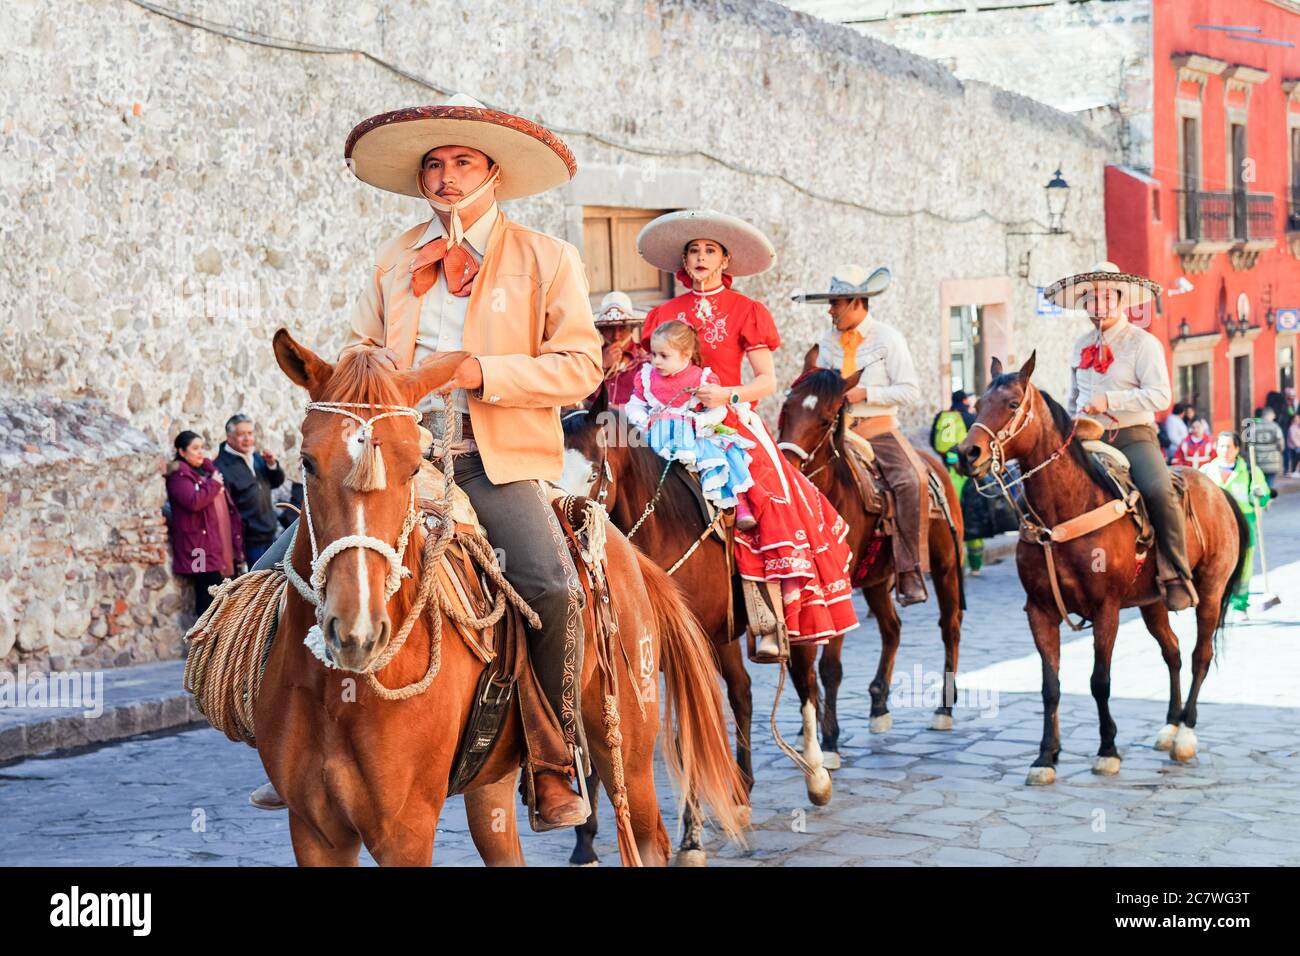 Mexican Cowboys ride their horses in a parade to celebrate the 251st birthday of the Mexican Independence hero Ignacio Allende January 21, 2020 in San Miguel de Allende, Guanajuato, Mexico. Allende, from a wealthy family in San Miguel played a major role in the independency war against Spain in 1810 and later honored by his home city by adding his name. Stock Photo